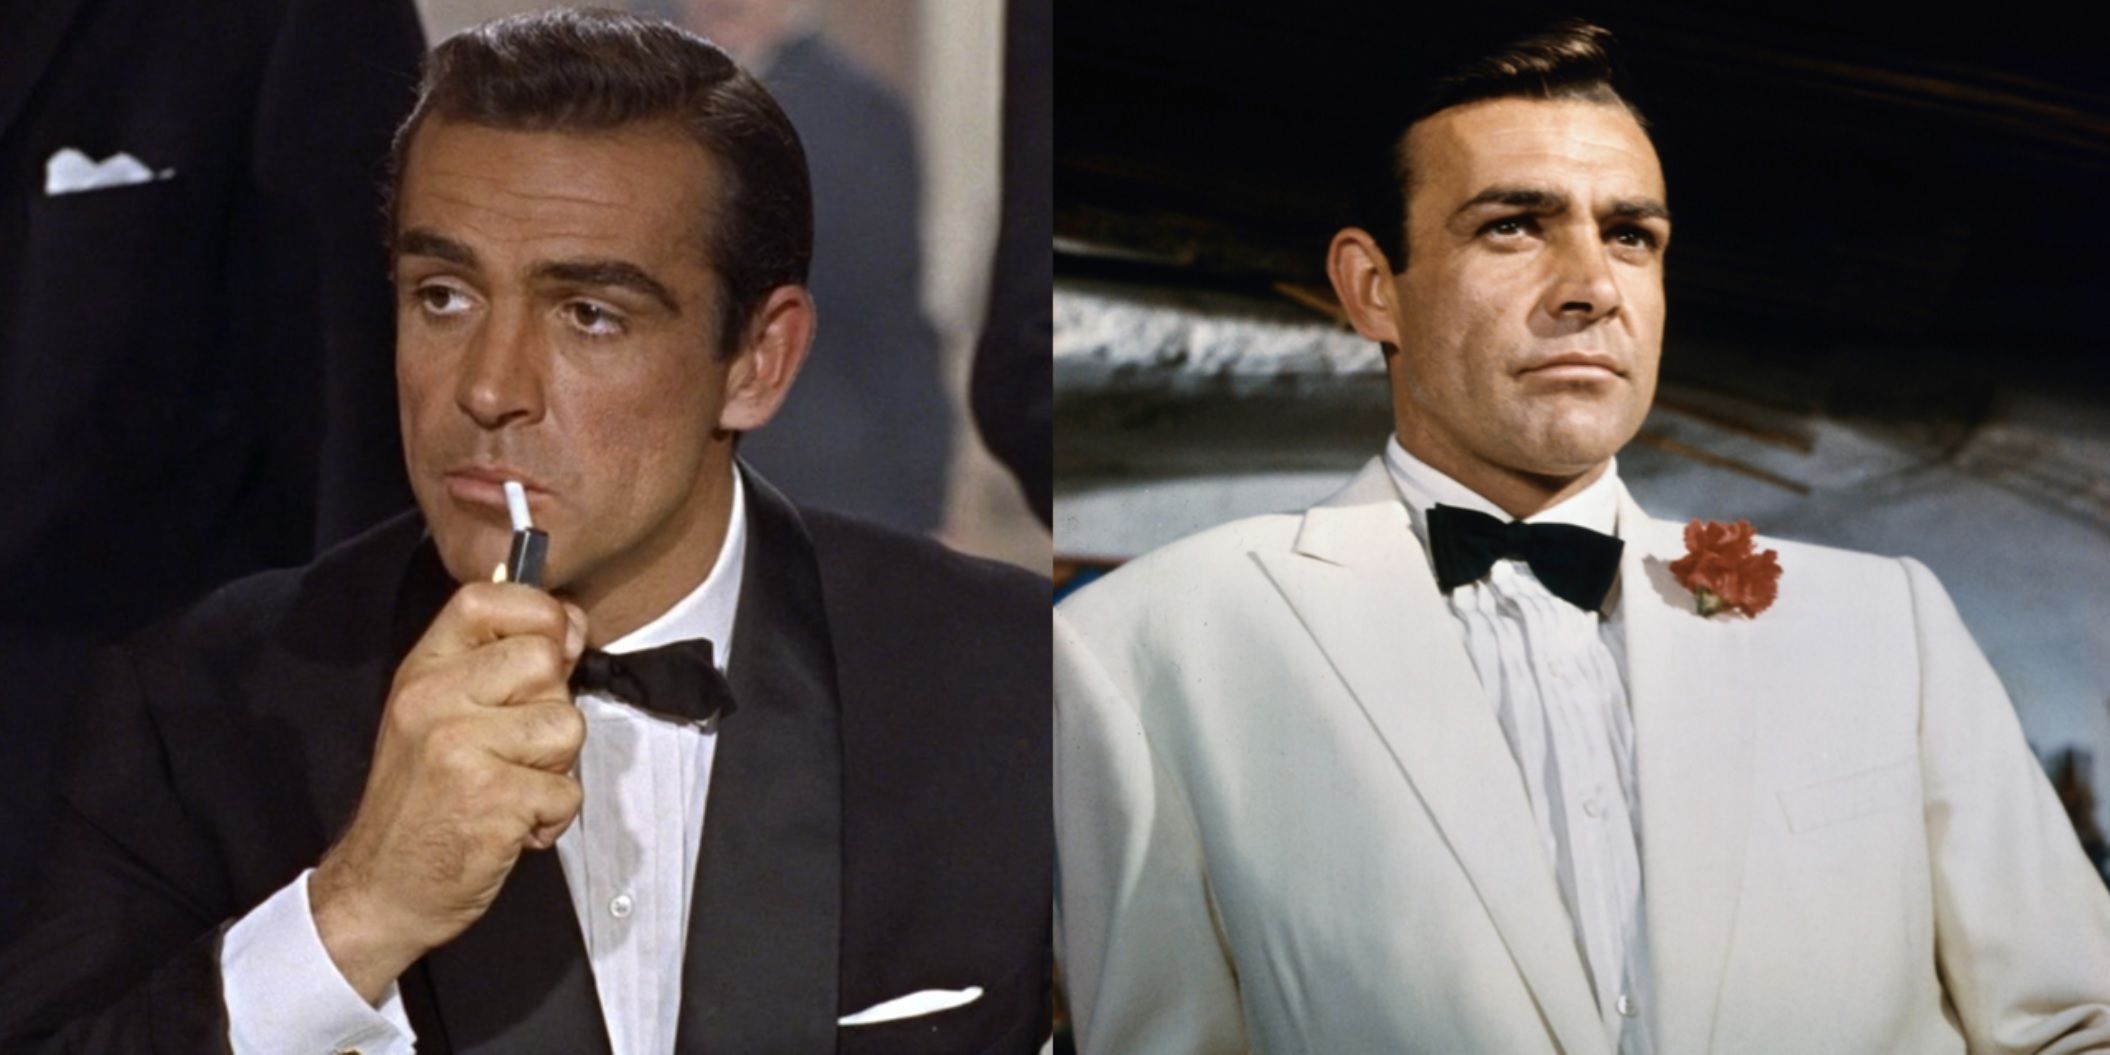 Split image of Sean Connery as James Bond wearing black and white tuxedos